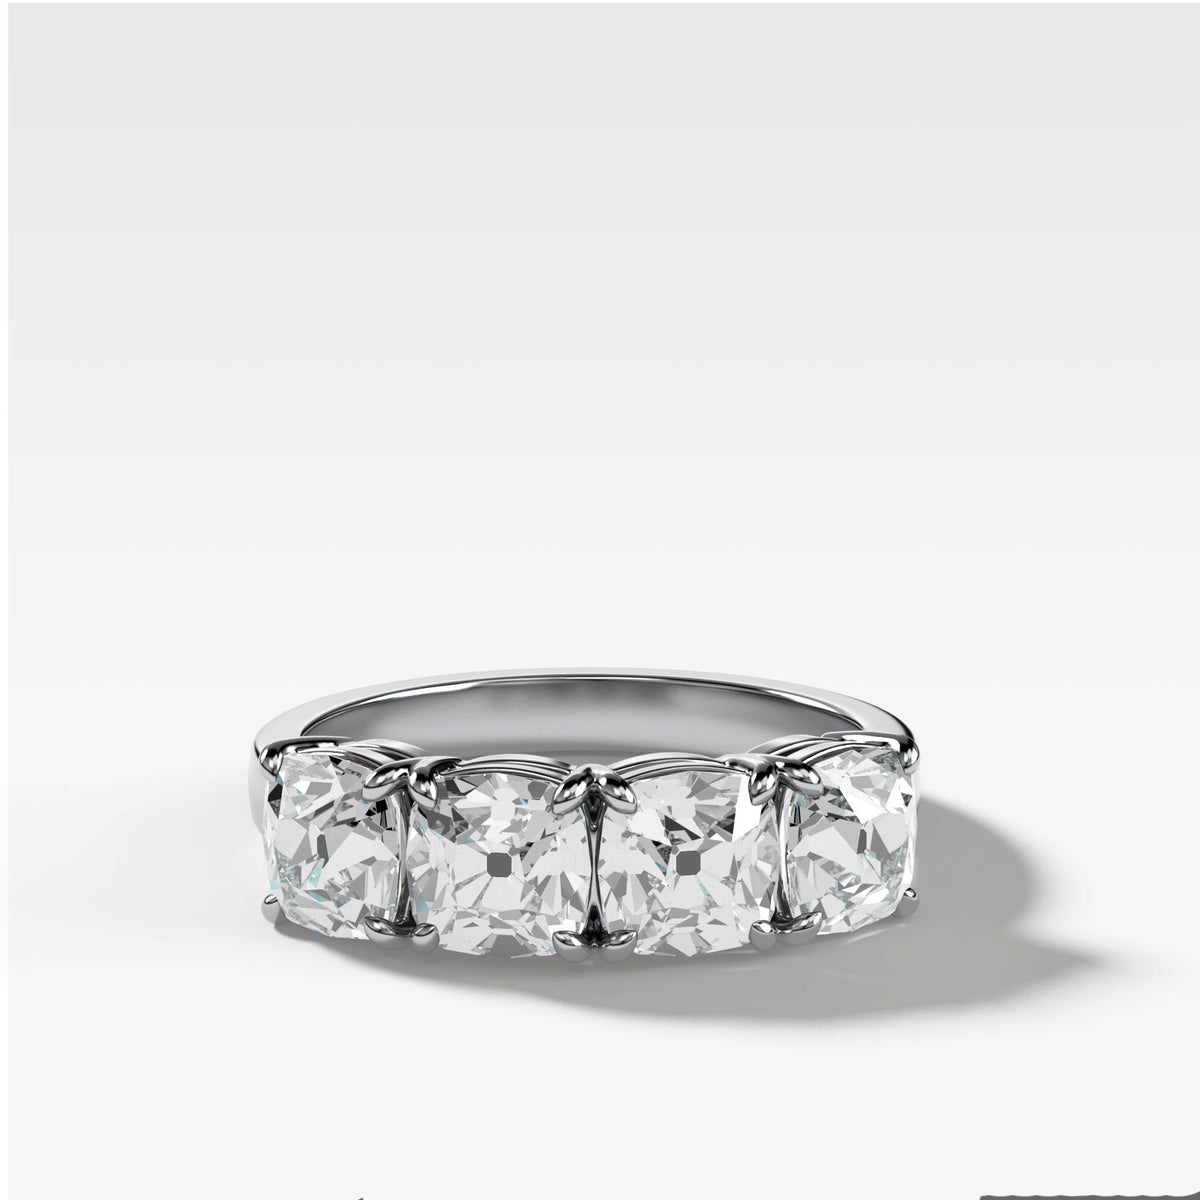 Four Stone Diamond Wedding Band With Old Mine Cuts by Good Stone in White Gold